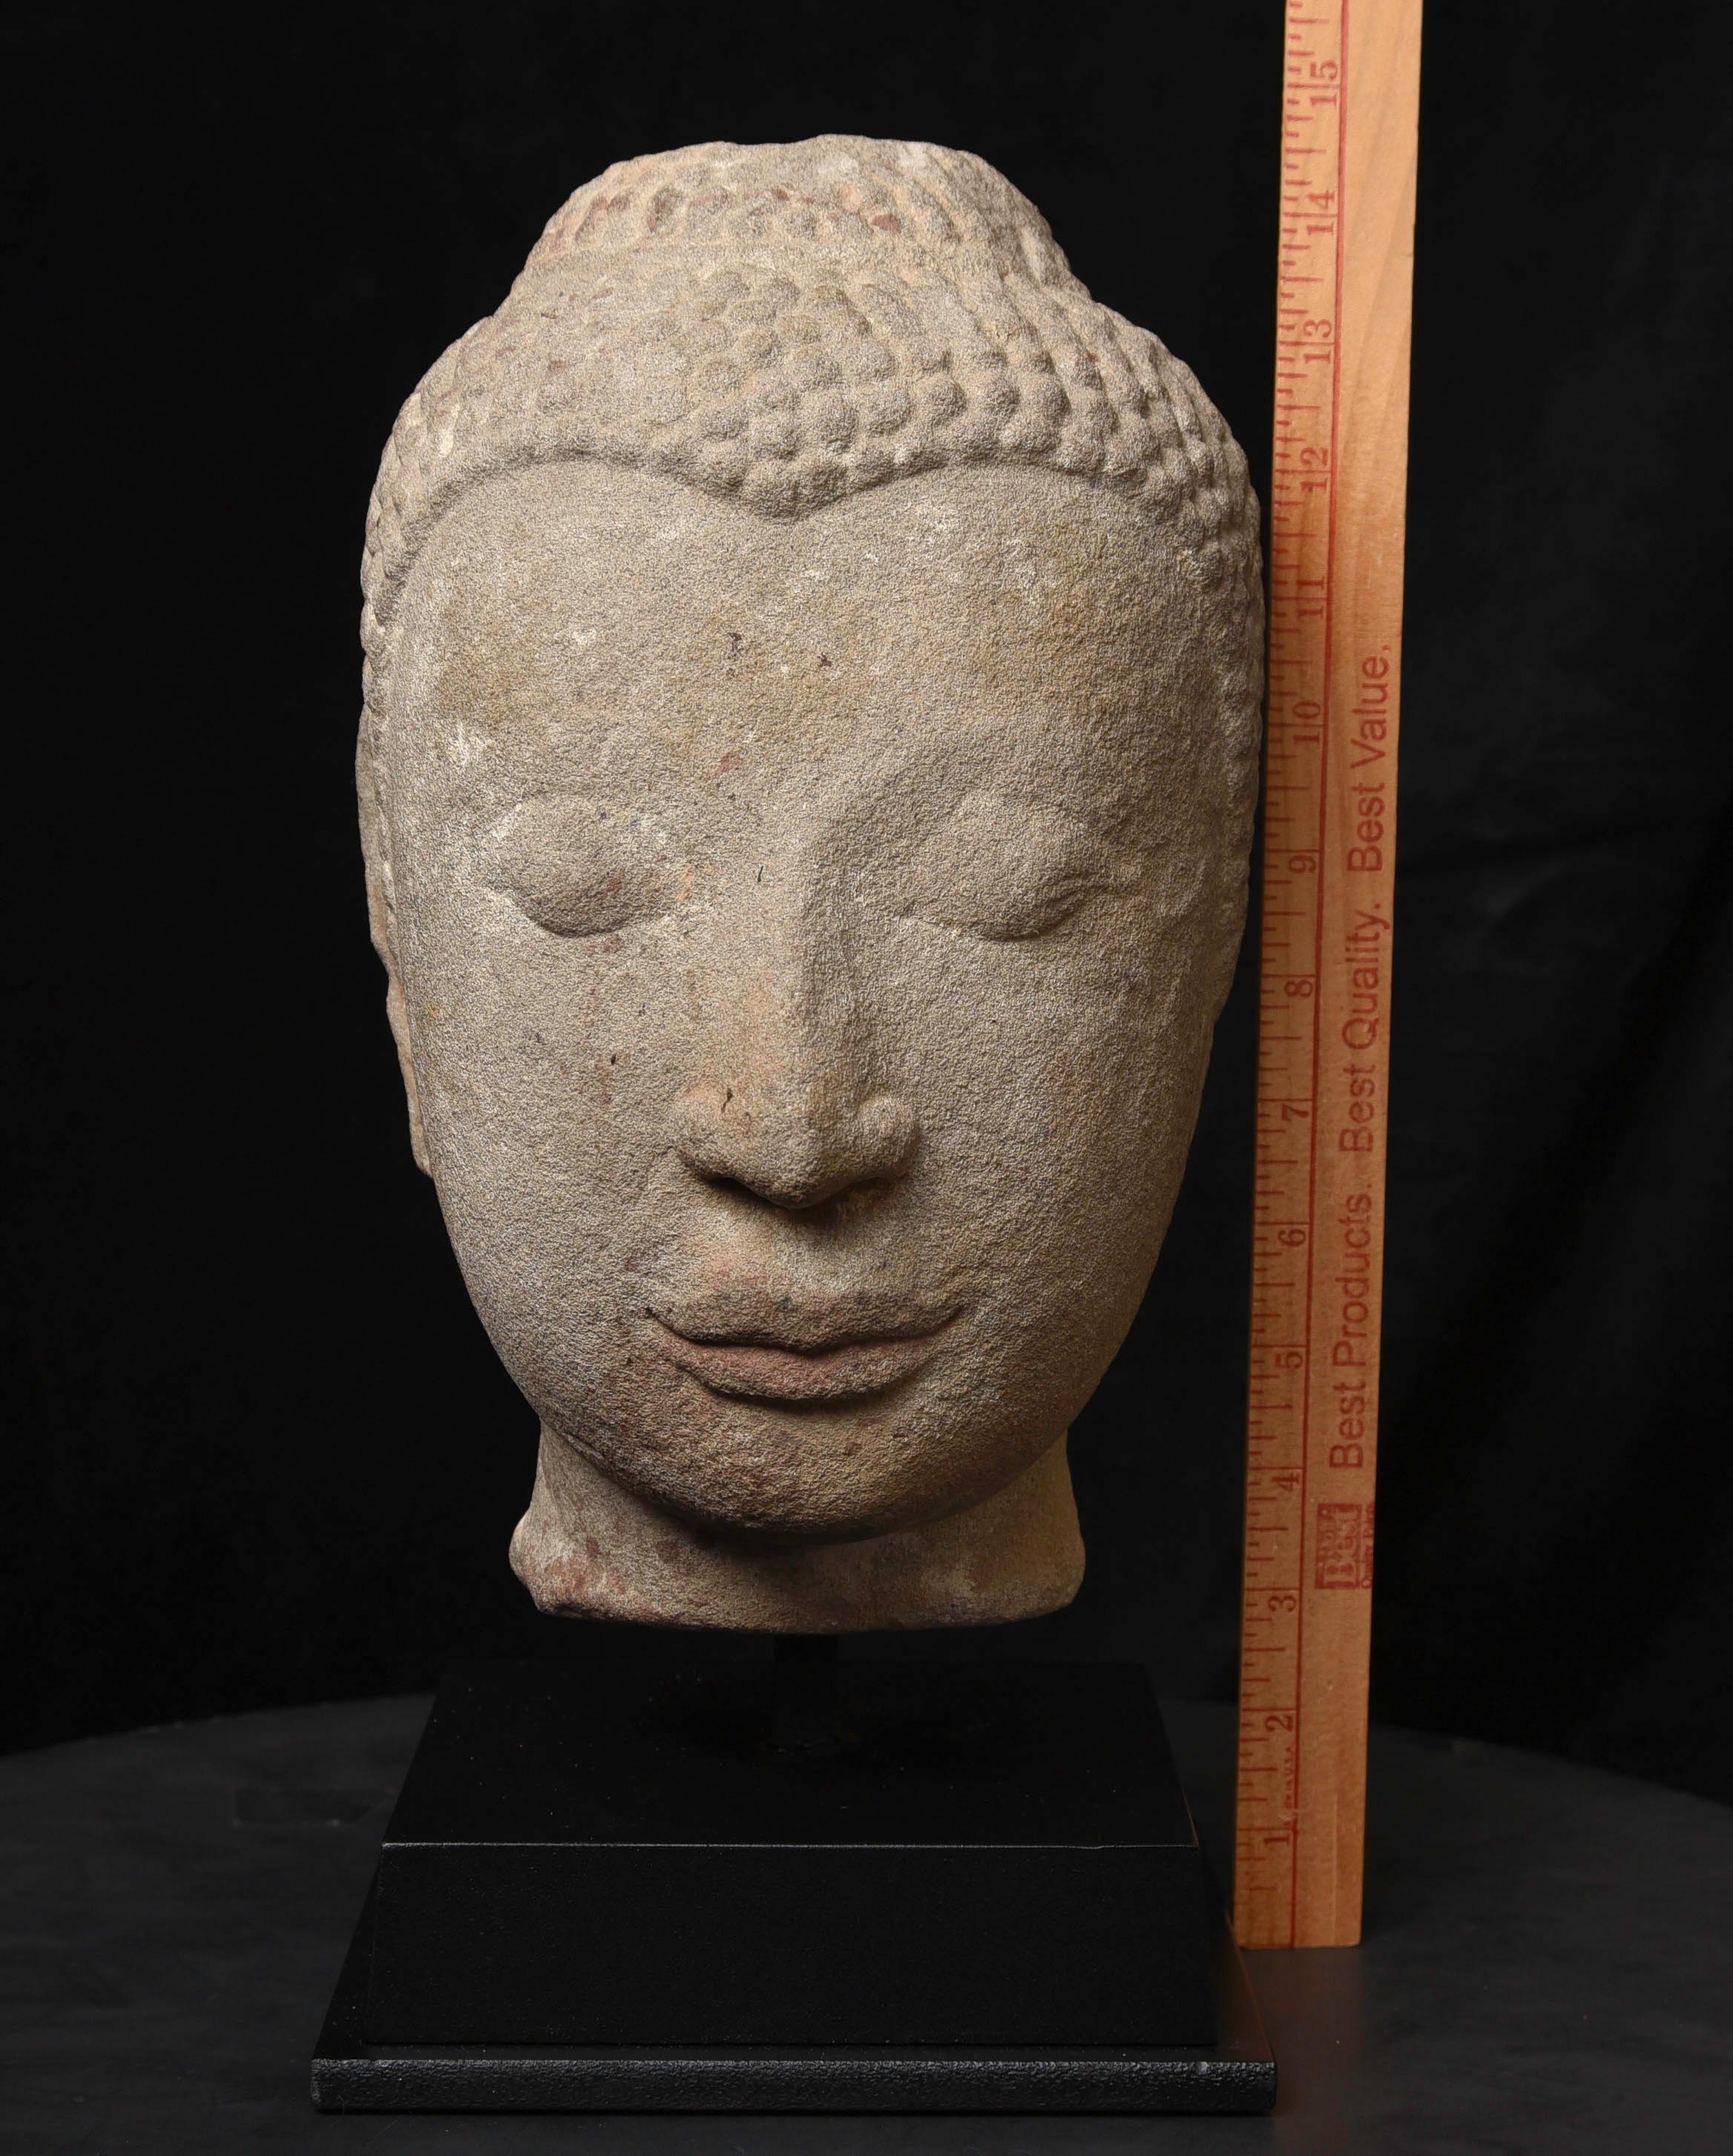 Life-size 16th century Thai stone head. The face is absolutely classic for this type--powerful, kind, and calm. The condition is very good, as can be seen in the photos. Large Buddhas of this type were meant to be looked at from below, as this